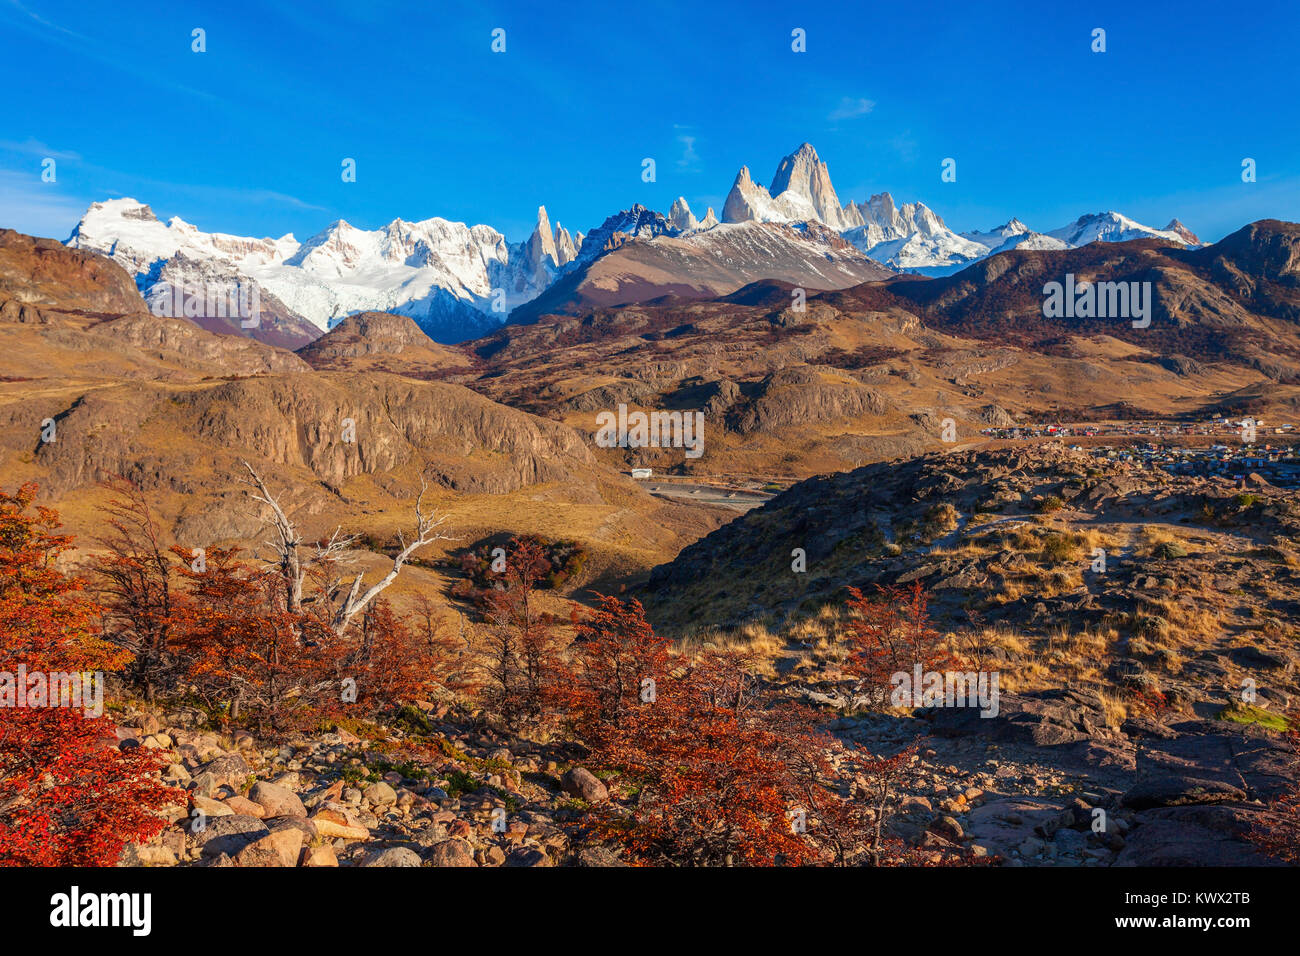 Monte Fitz Roy (also known as Cerro Chalten) aerial view. Fitz Roy is a mountain located near El Chalten, in the Southern Patagonia, on the border bet Stock Photo